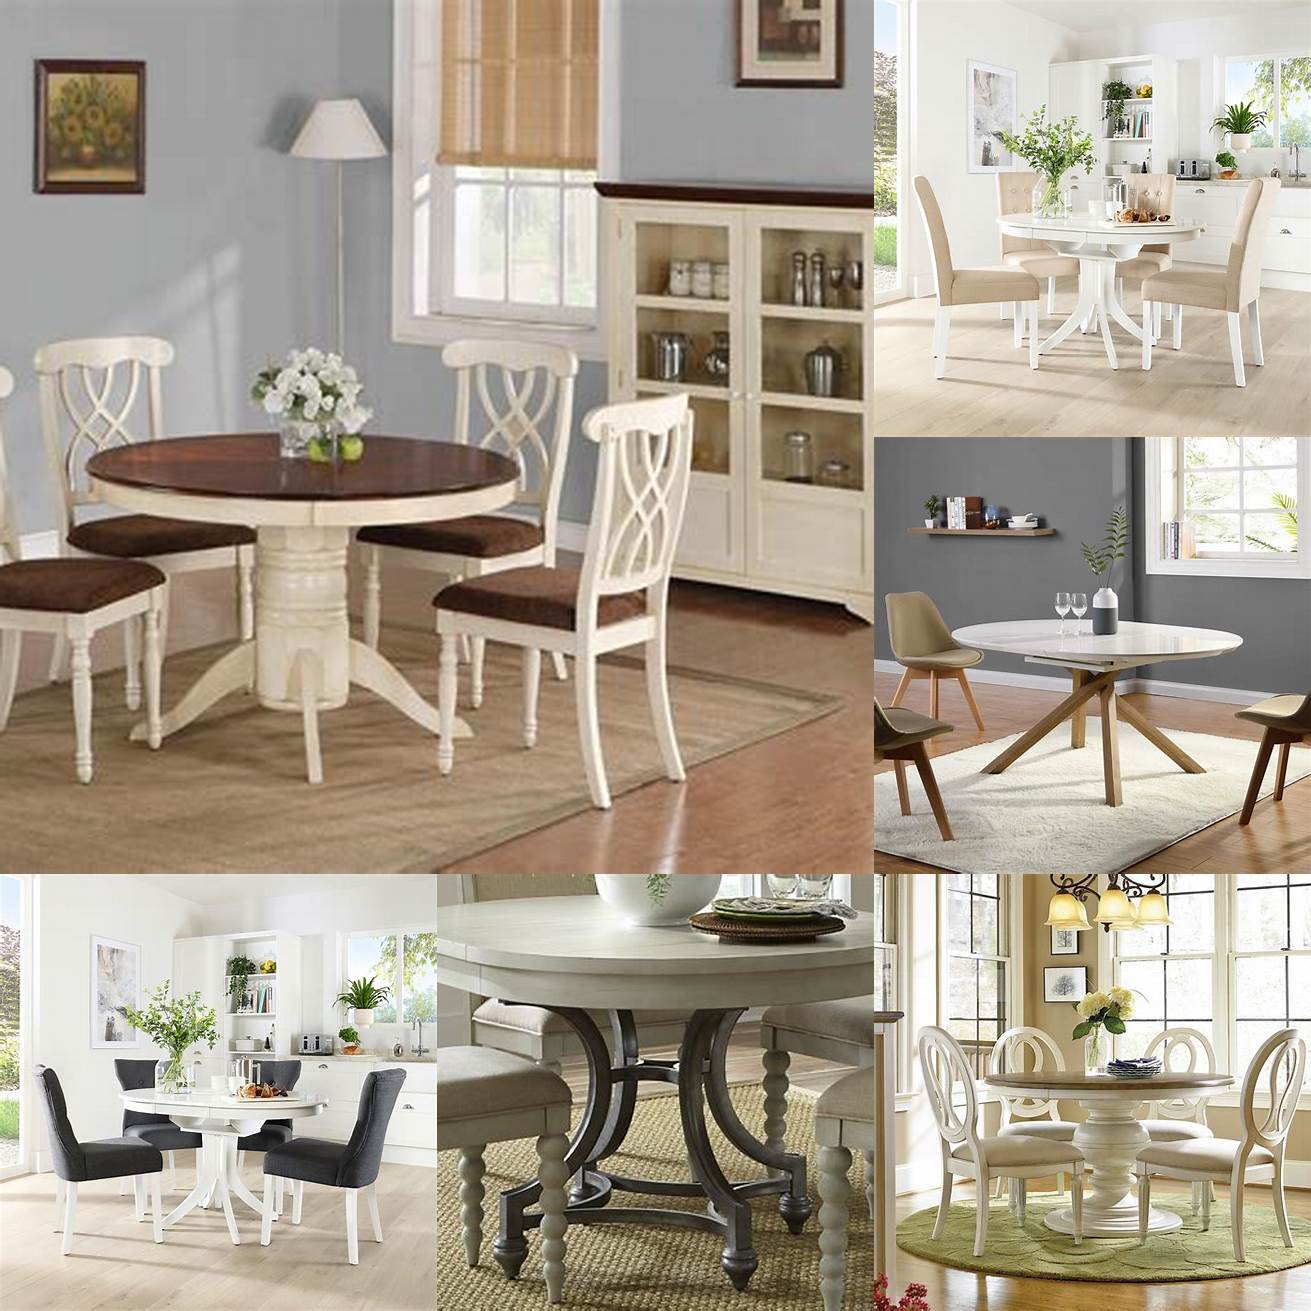 A white extendable round kitchen table that can accommodate more seats